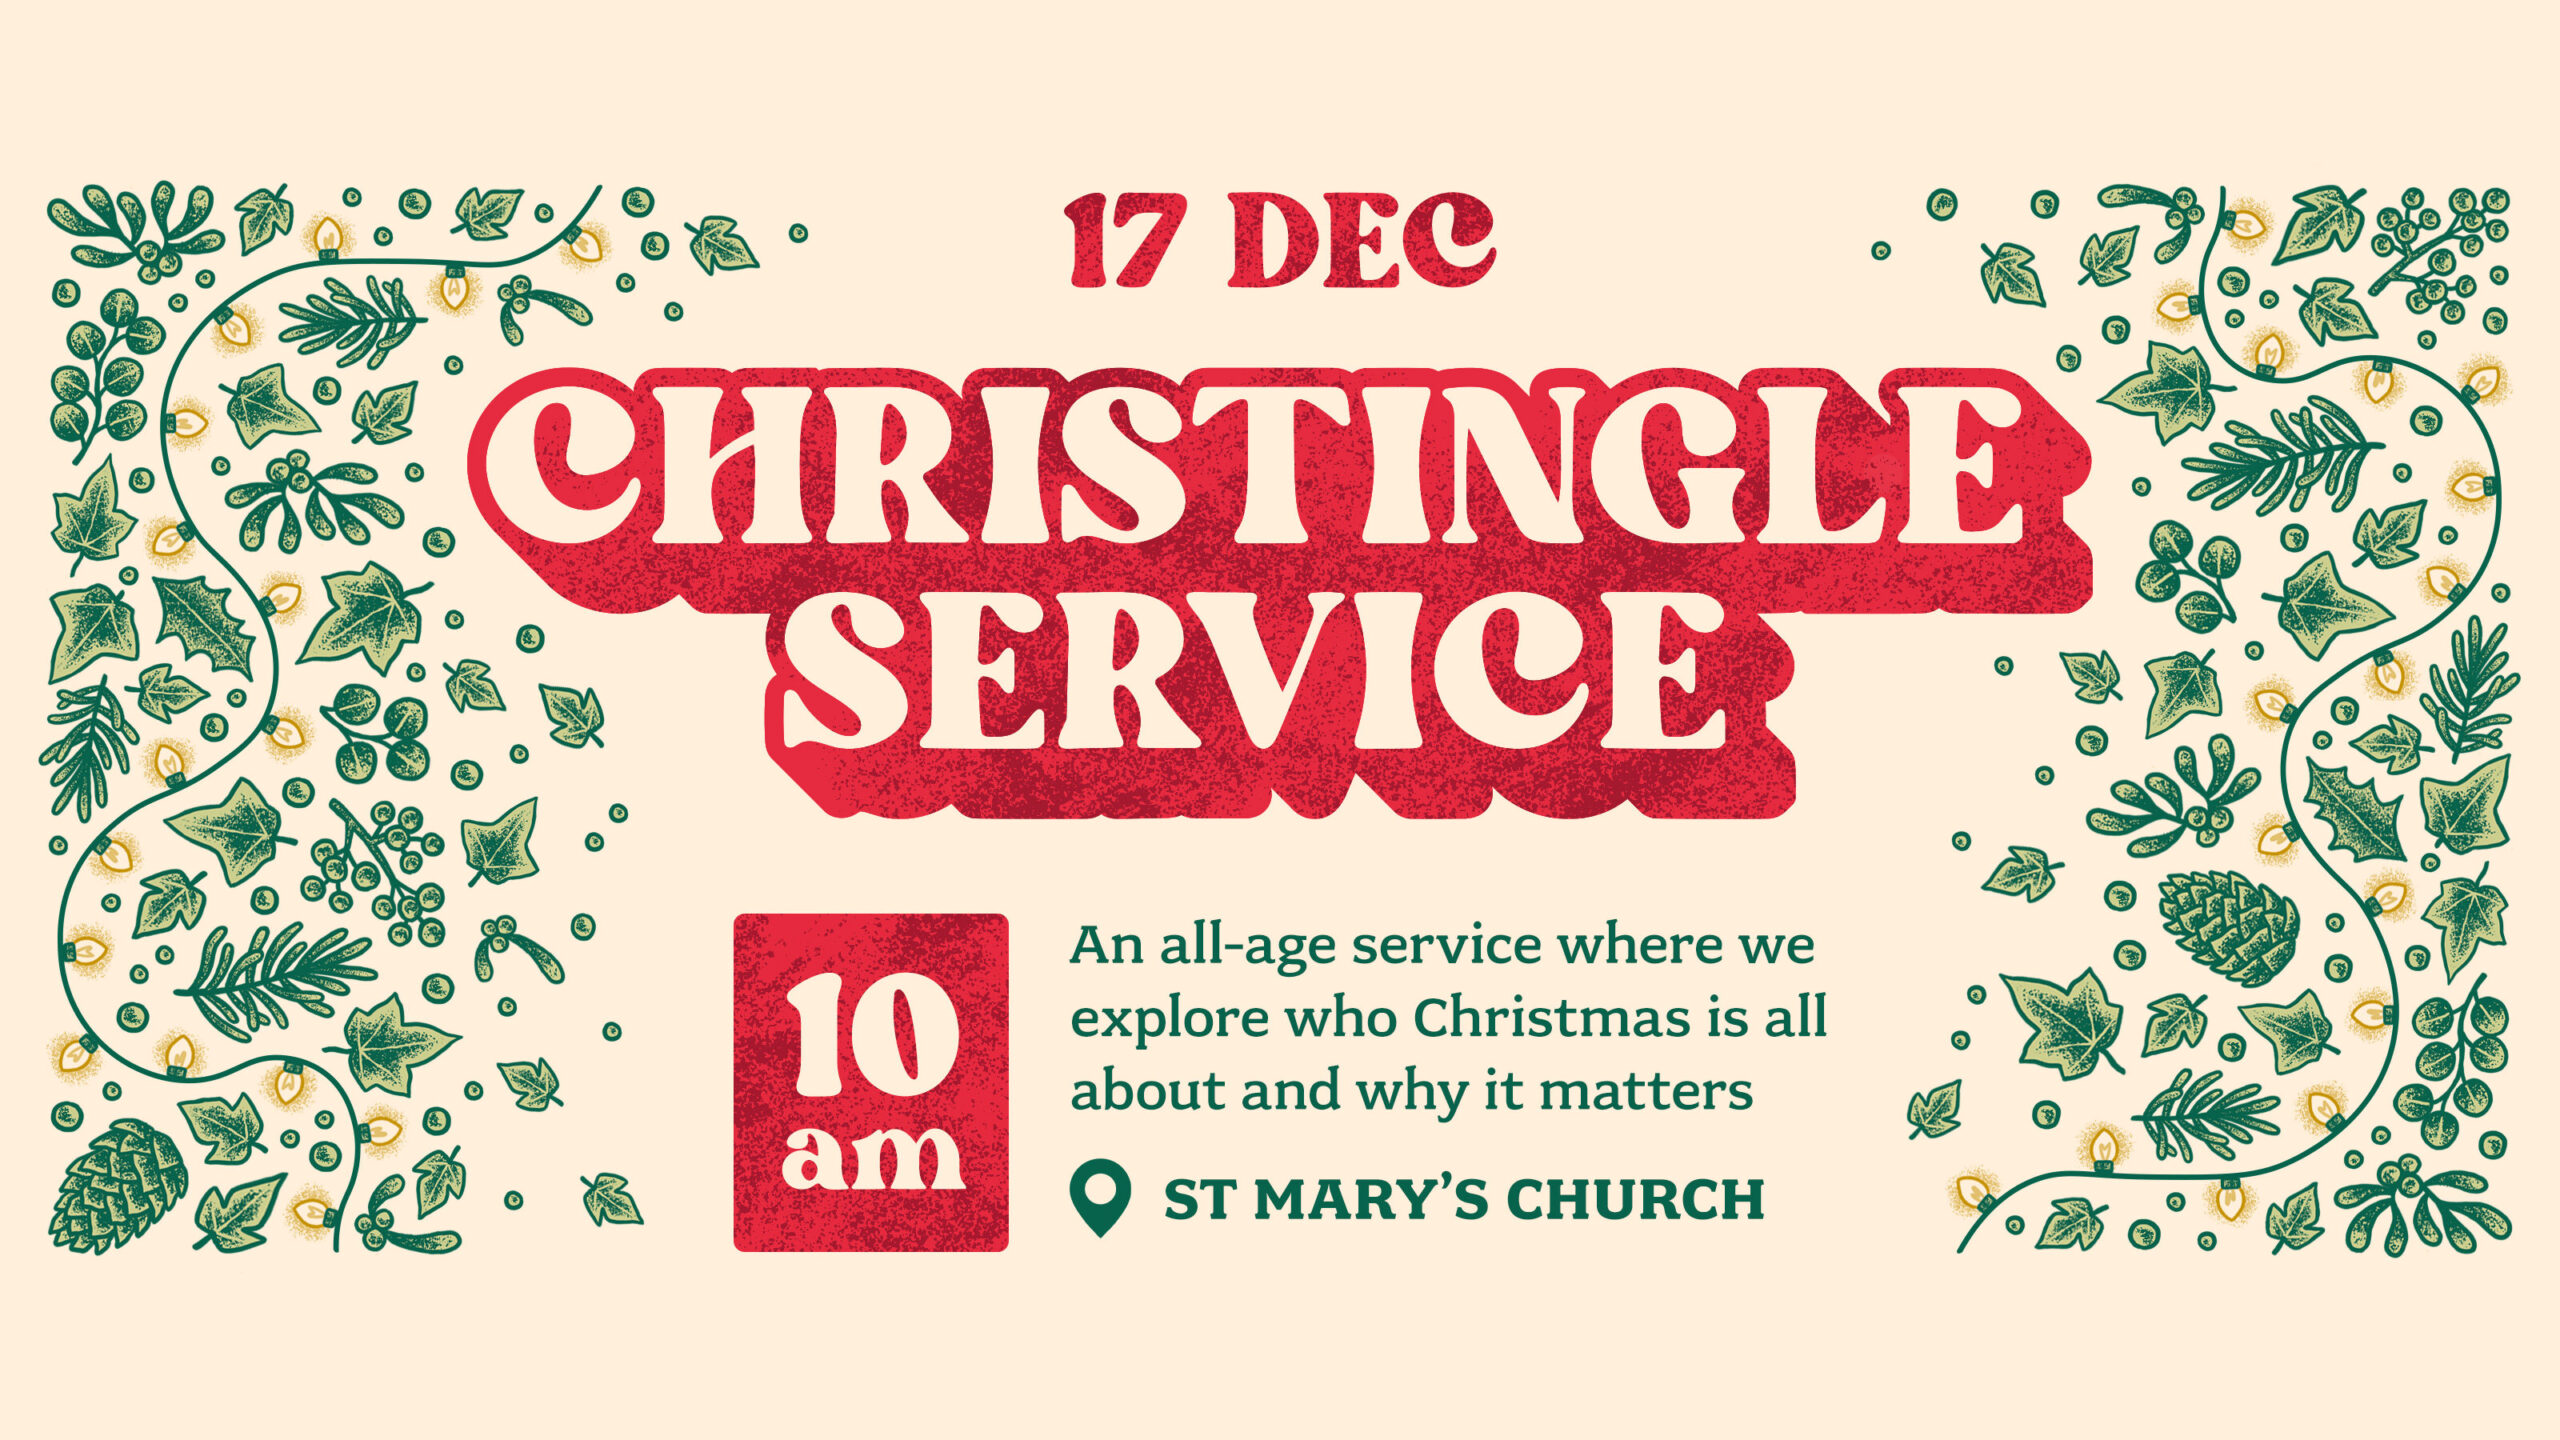 17 Dec, 10am
Christingle Service
An all-age service where we explore who Christmas is all about and why it matters
St Mary's Church